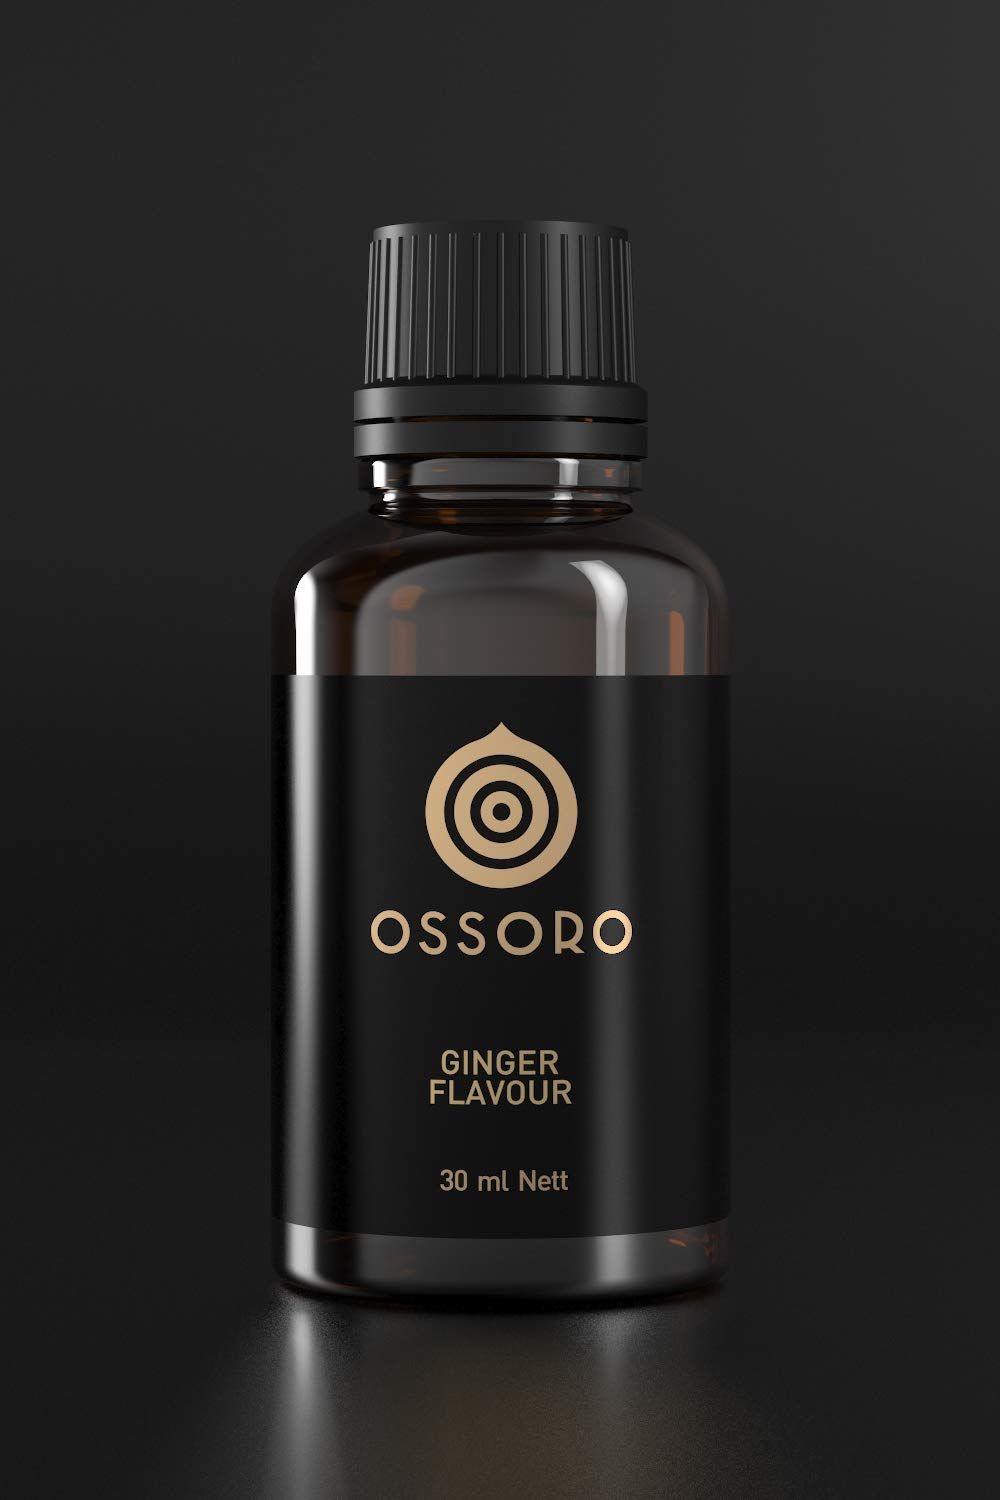 Ossoro Ginger Flavour Image